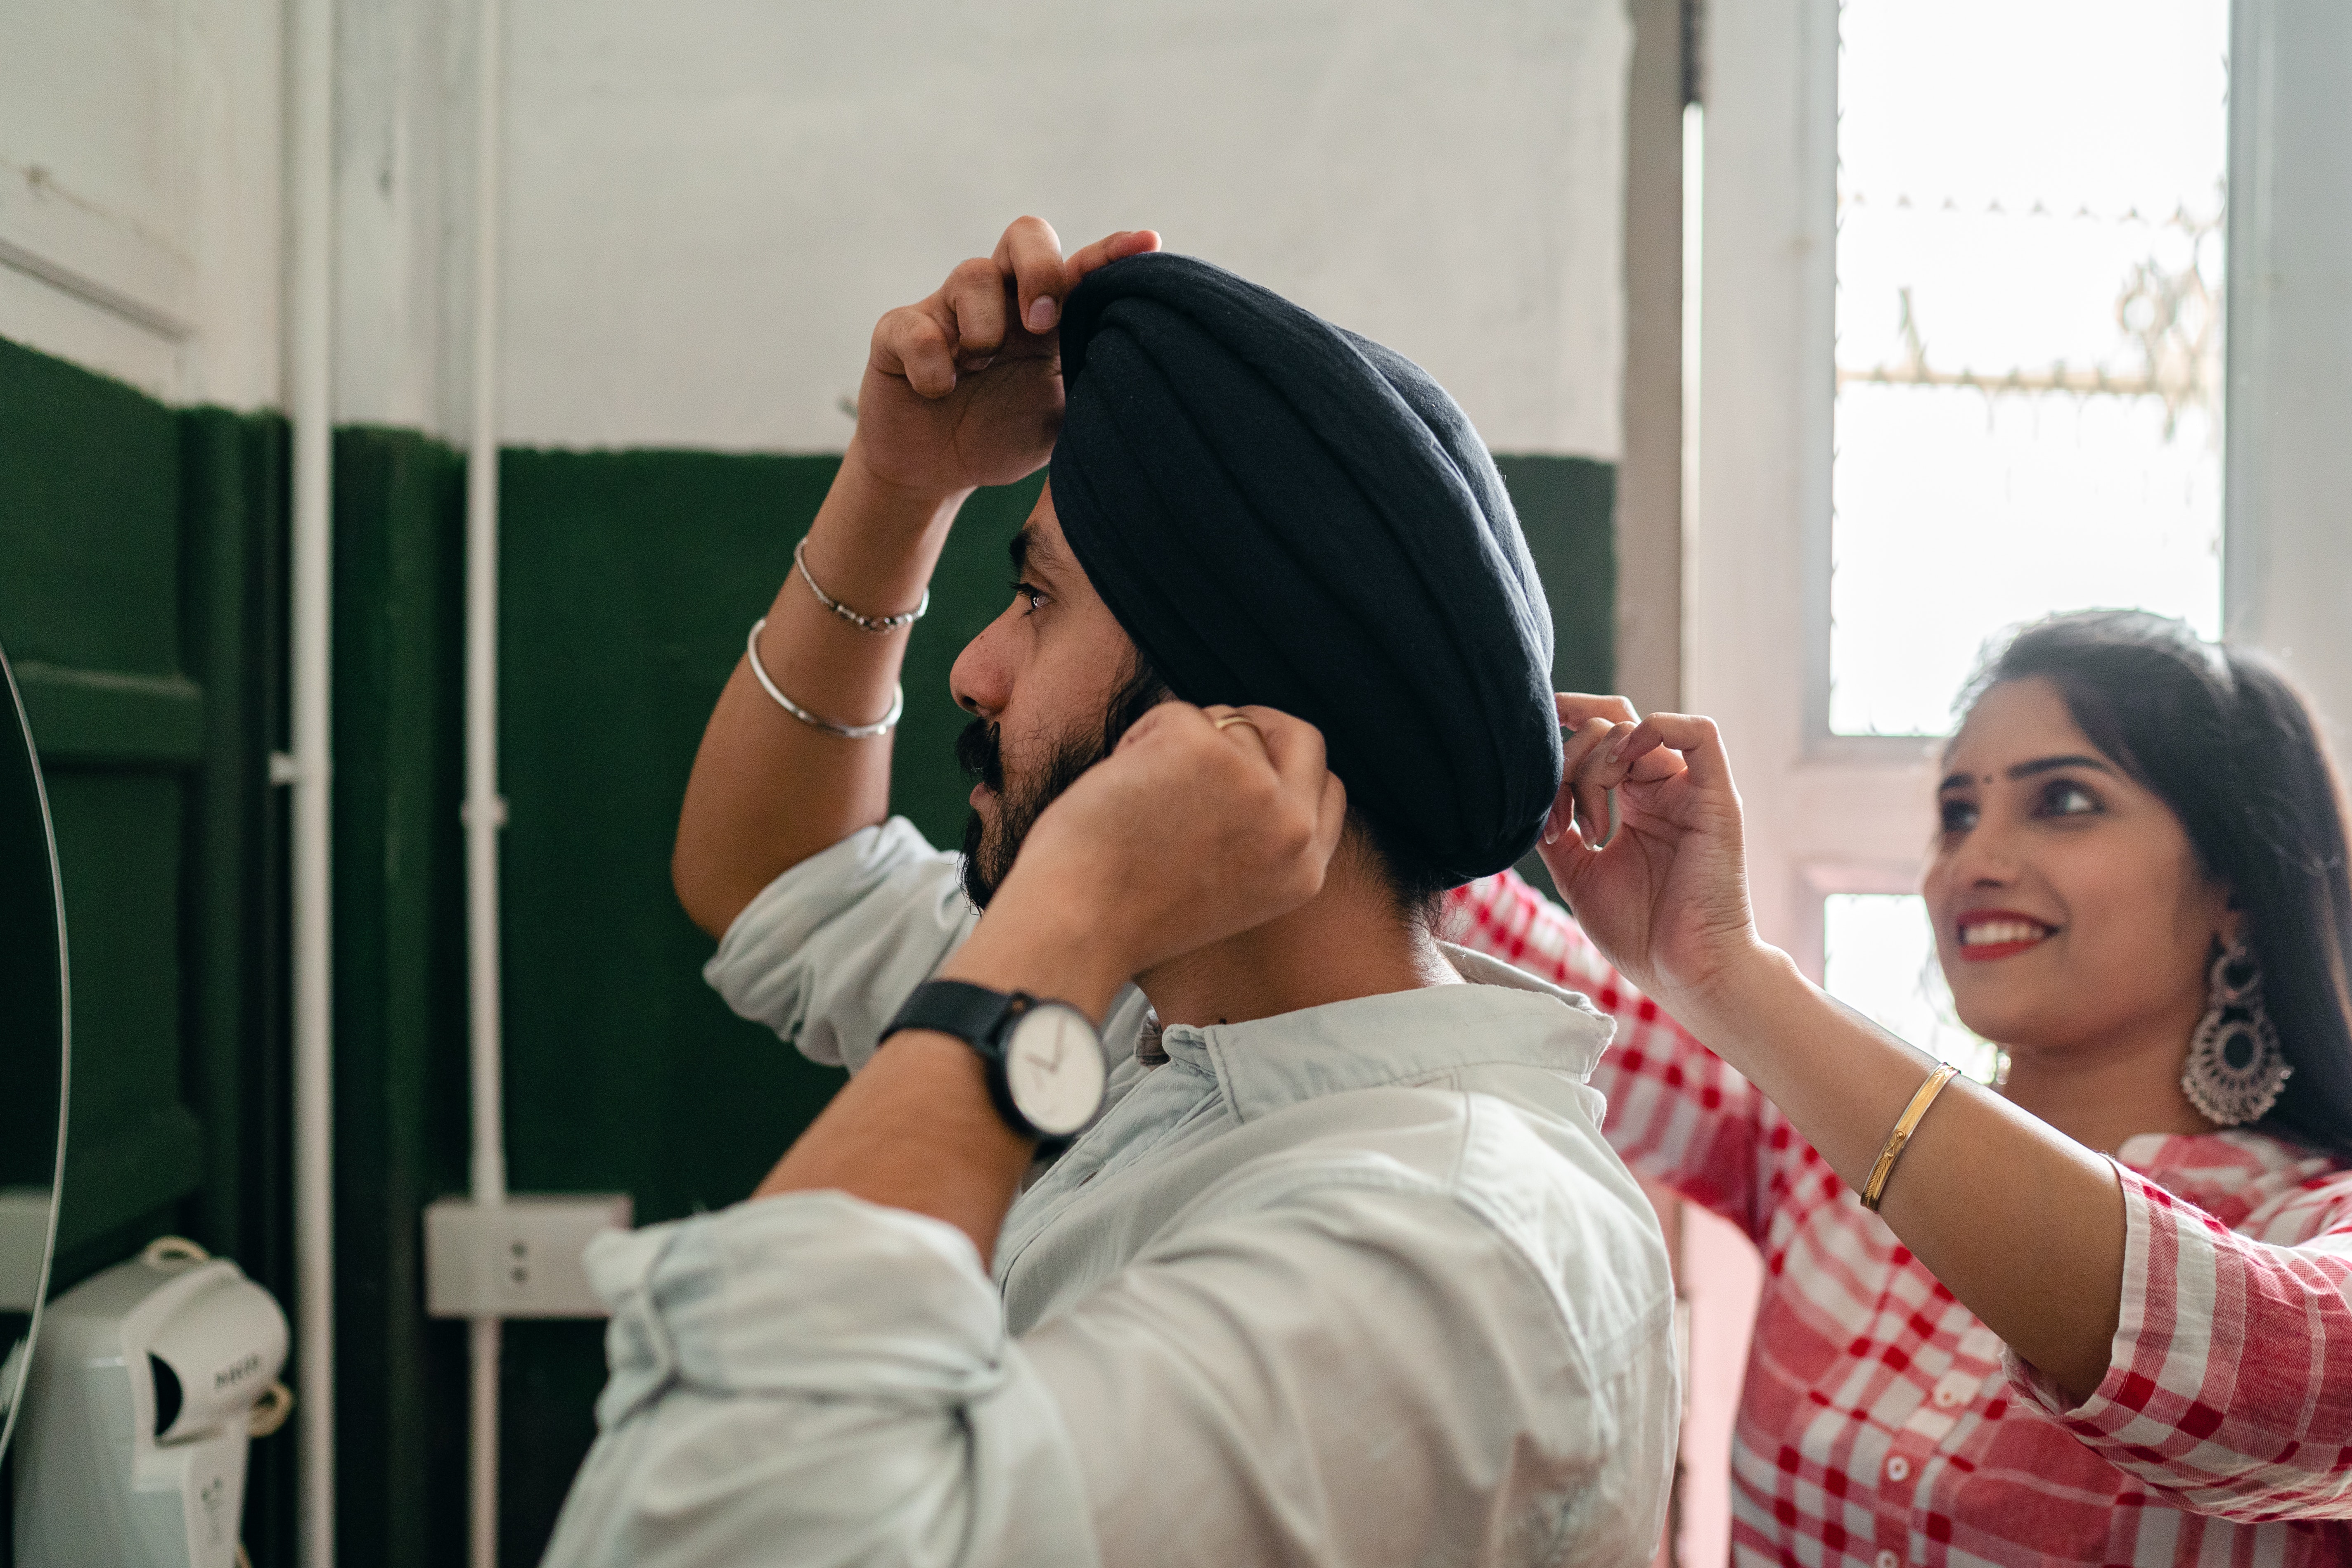 A woman helps her partner adjust his turban